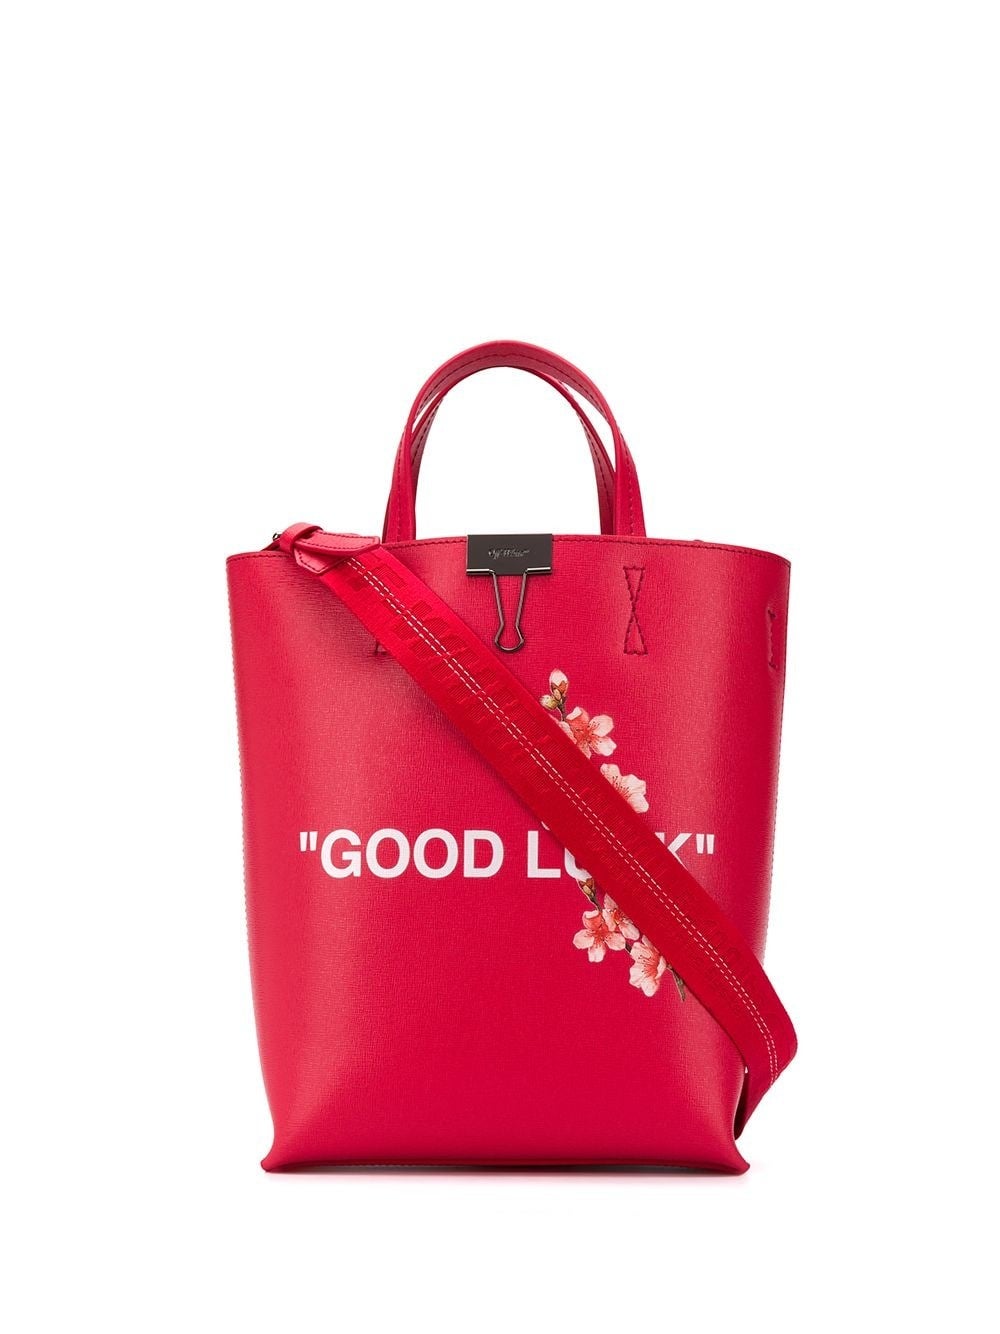 Off-White + Lunar New Year Print Tote